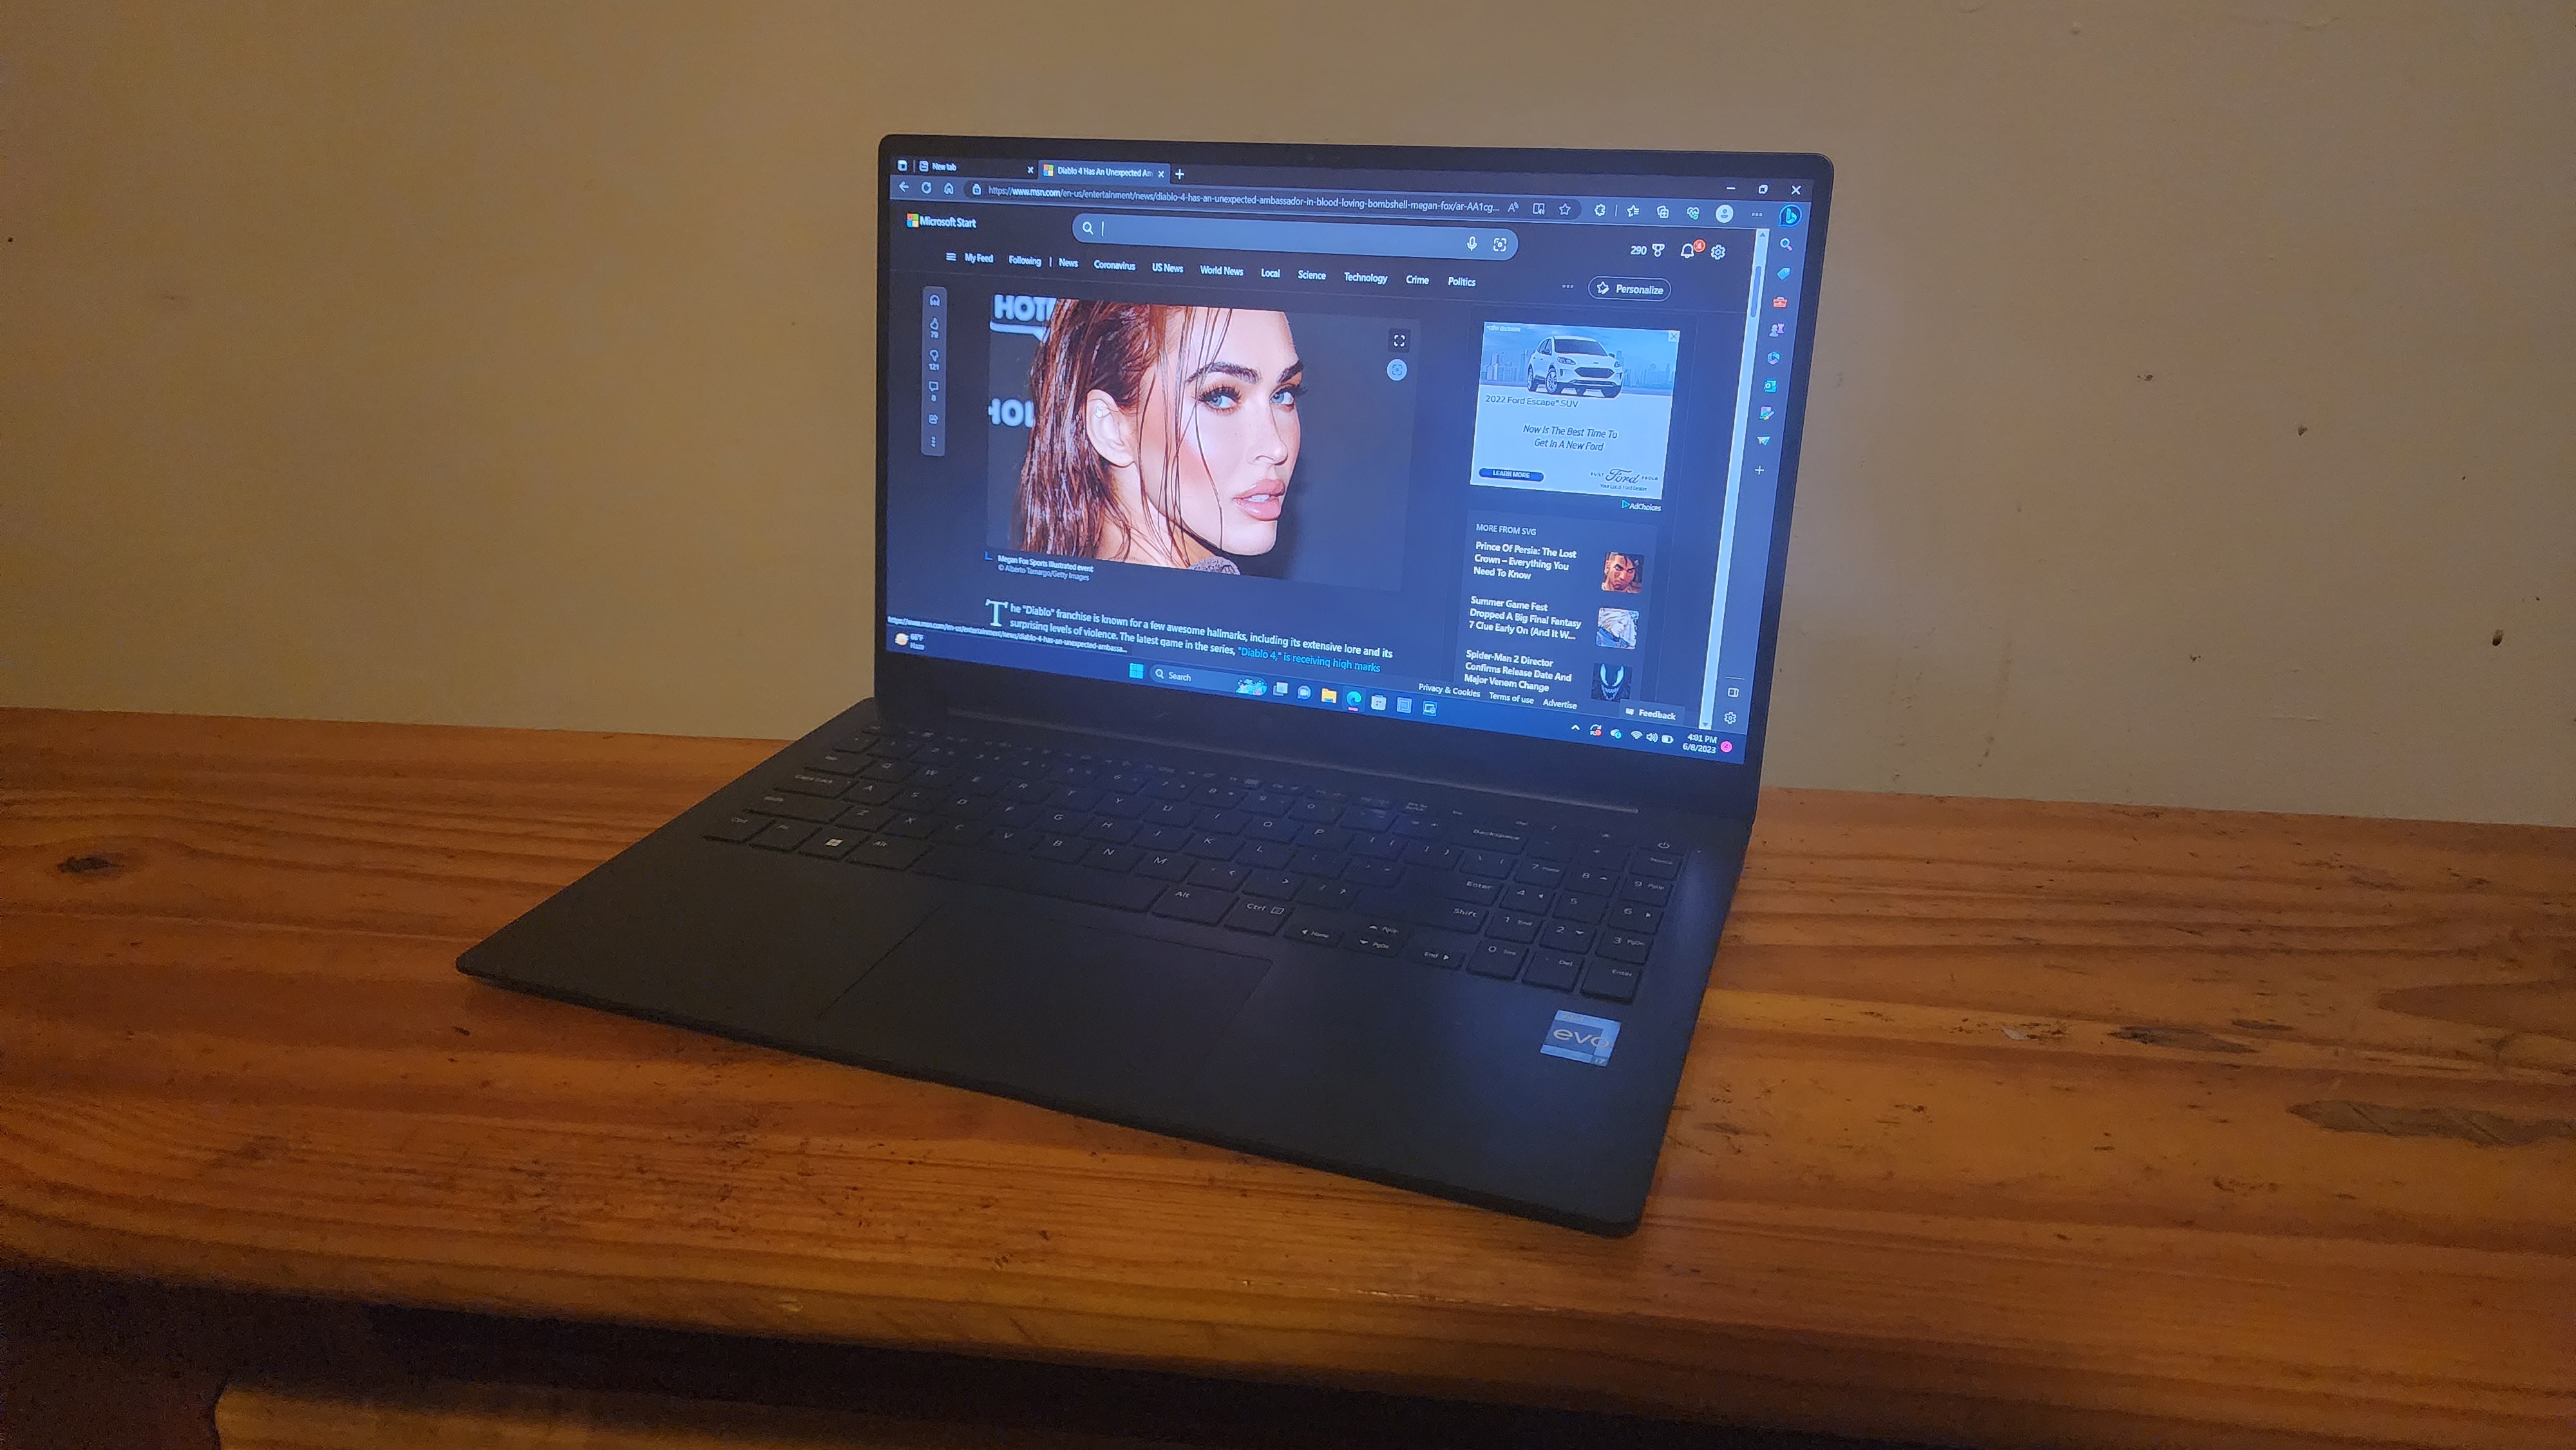 A picture of Megan Fox on a laptop